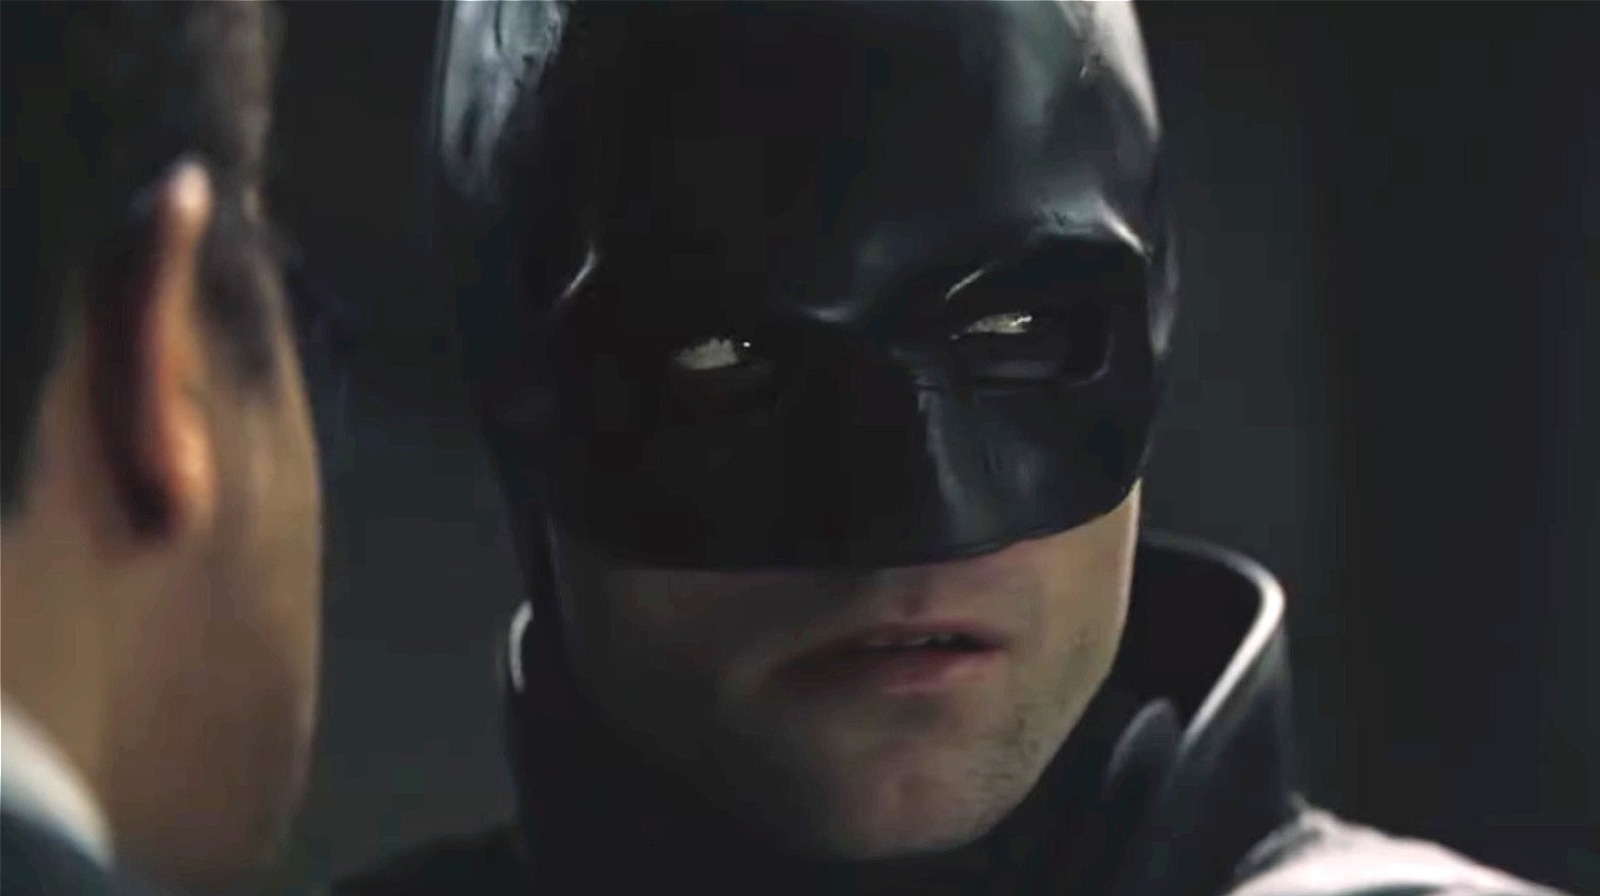 Why The Batman's Ending Has Critics And Fans So Divided